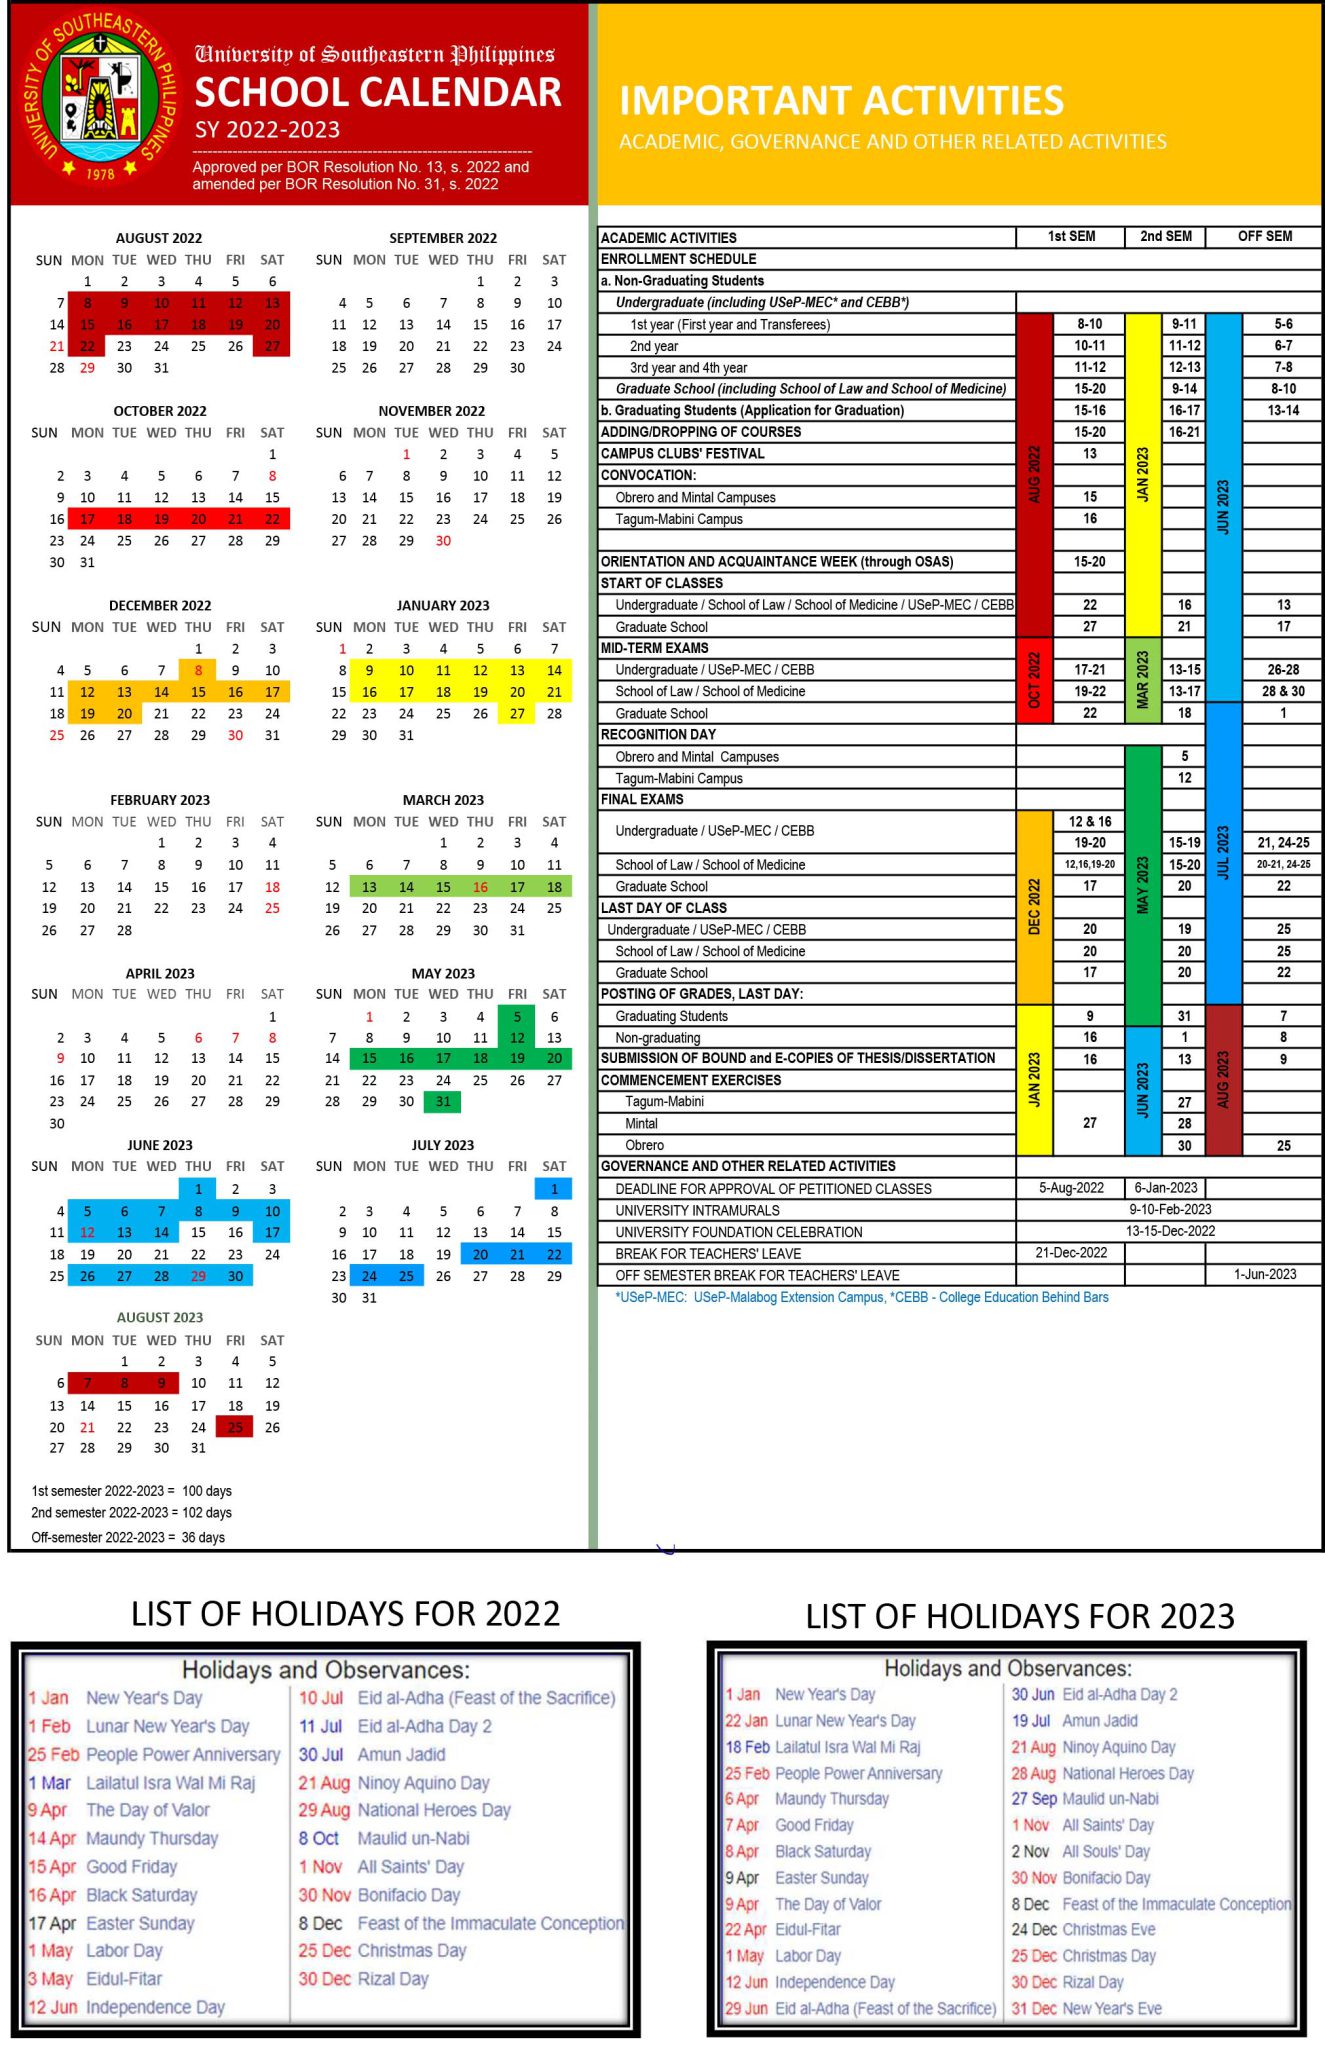 usep-amended-school-calendar-for-the-school-year-2022-2023-university-of-southeastern-philippines